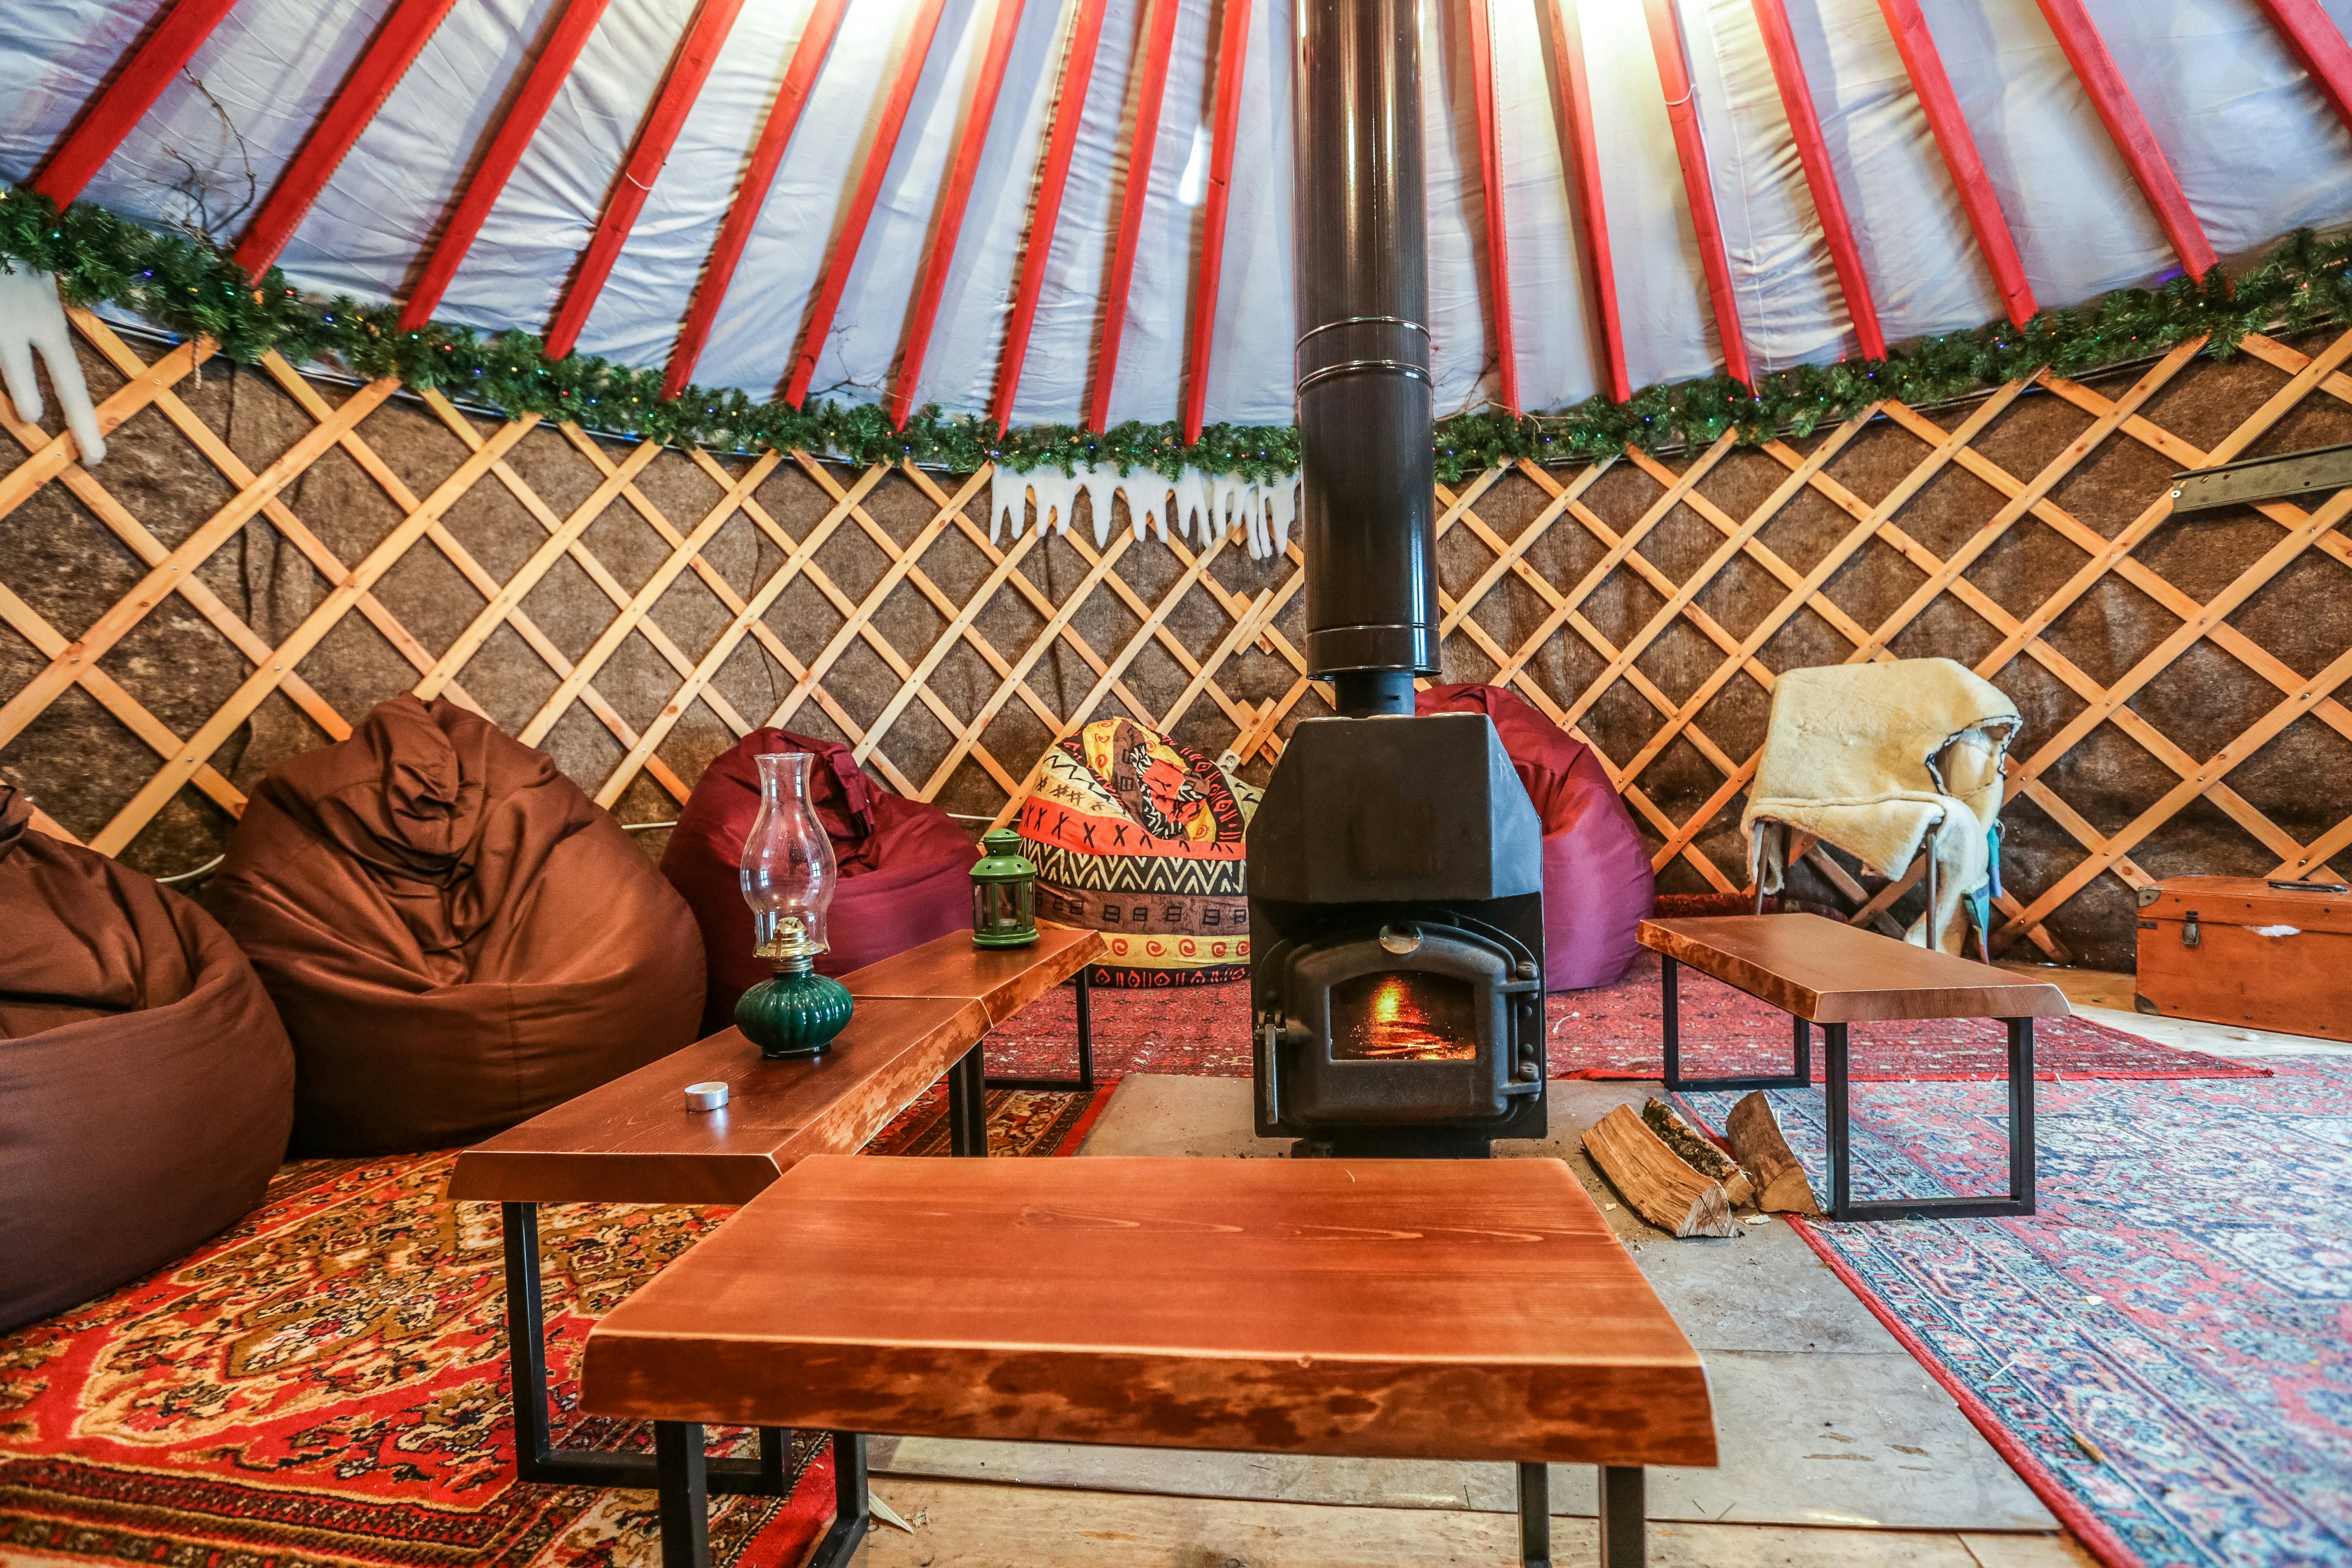 Cozy yurt camping interior with a fireplace